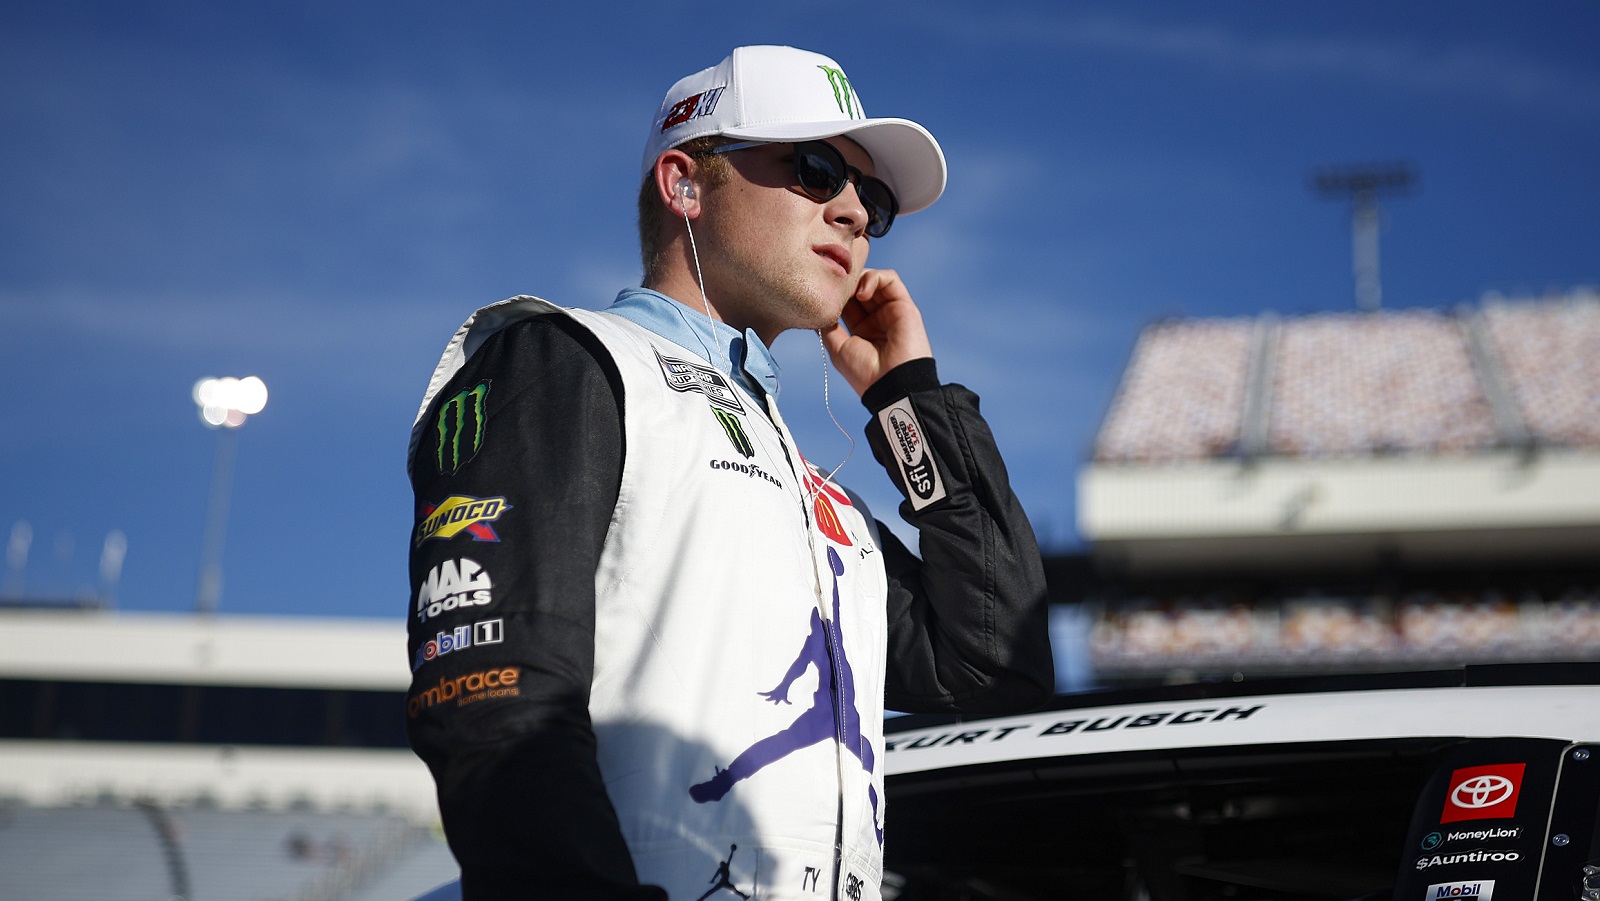 Ty Gibbs waits on the grid during practice for the NASCAR Cup Series Federated Auto Parts 400 at Richmond Raceway on Aug. 13, 2022, in Richmond, Virginia. | Jared C. Tilton/Getty Images